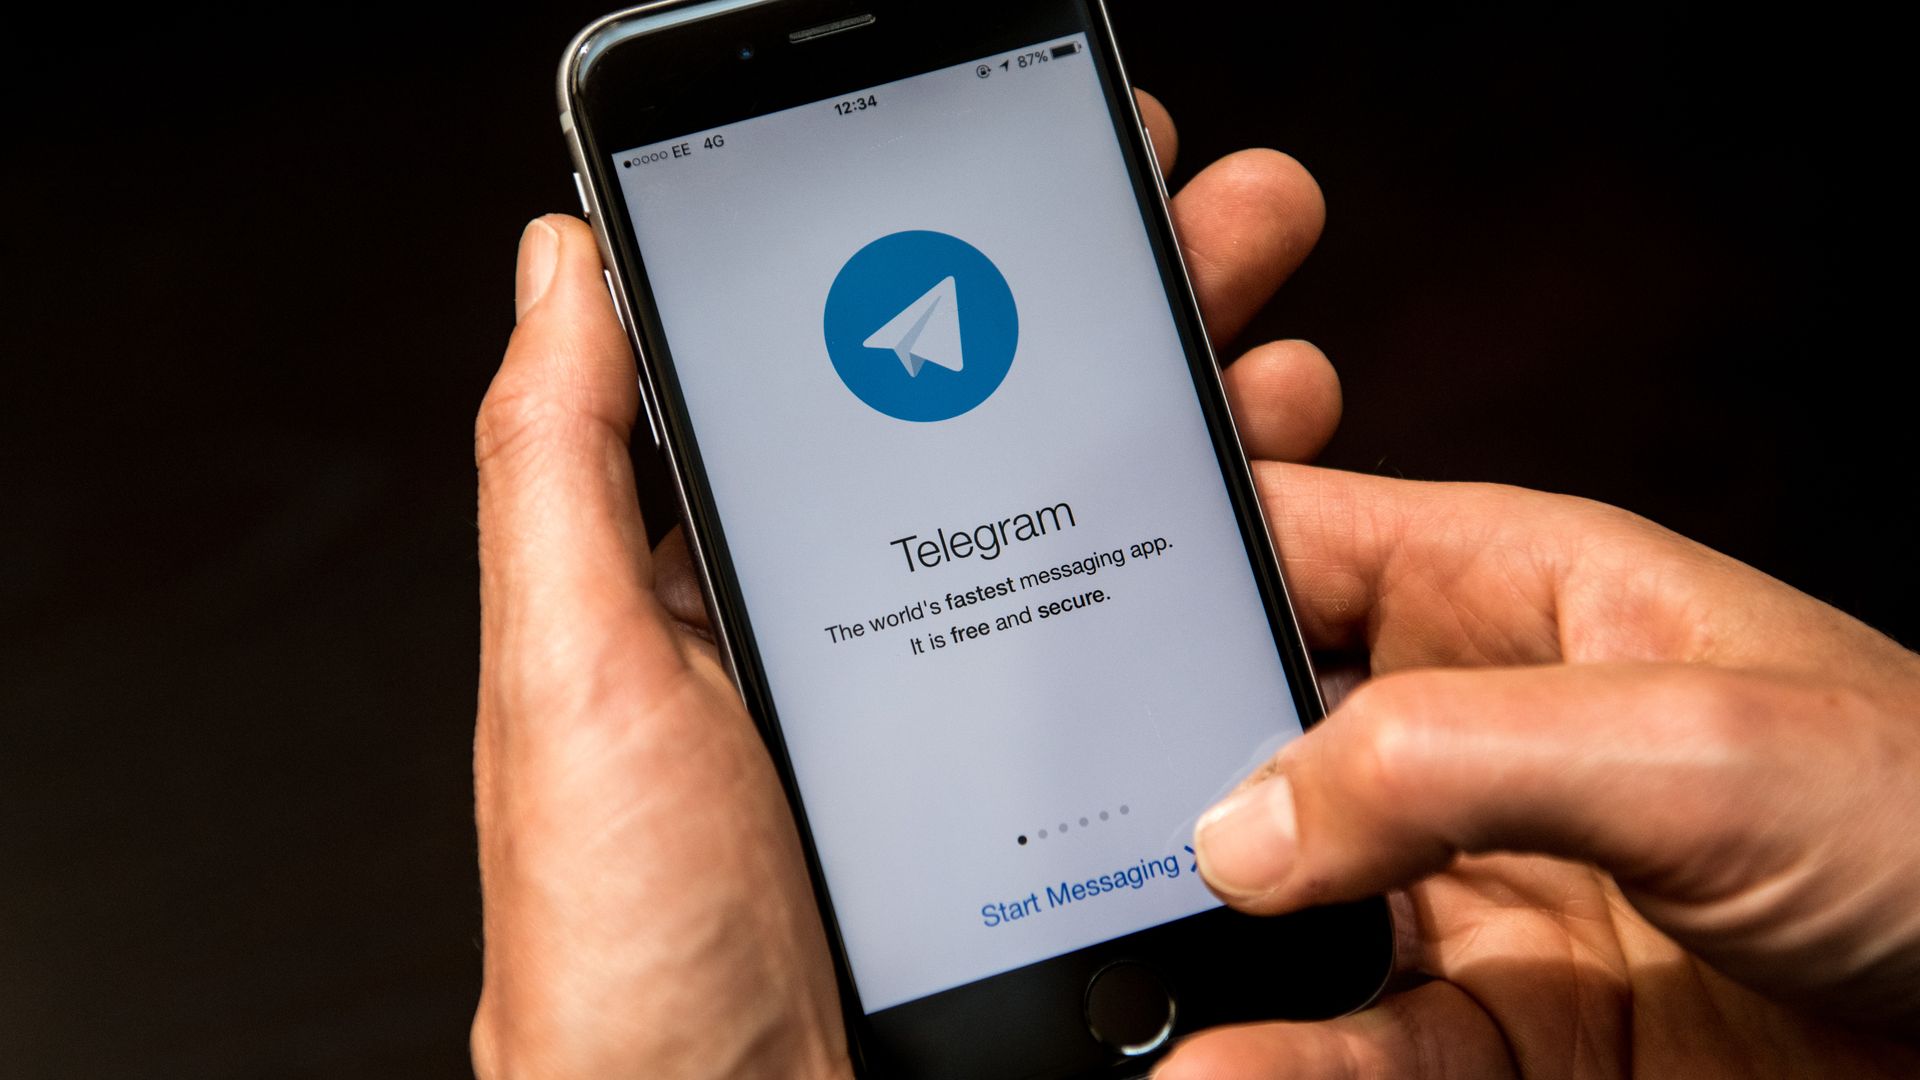 A close-up view of the Telegram messaging app is seen on a smart phone